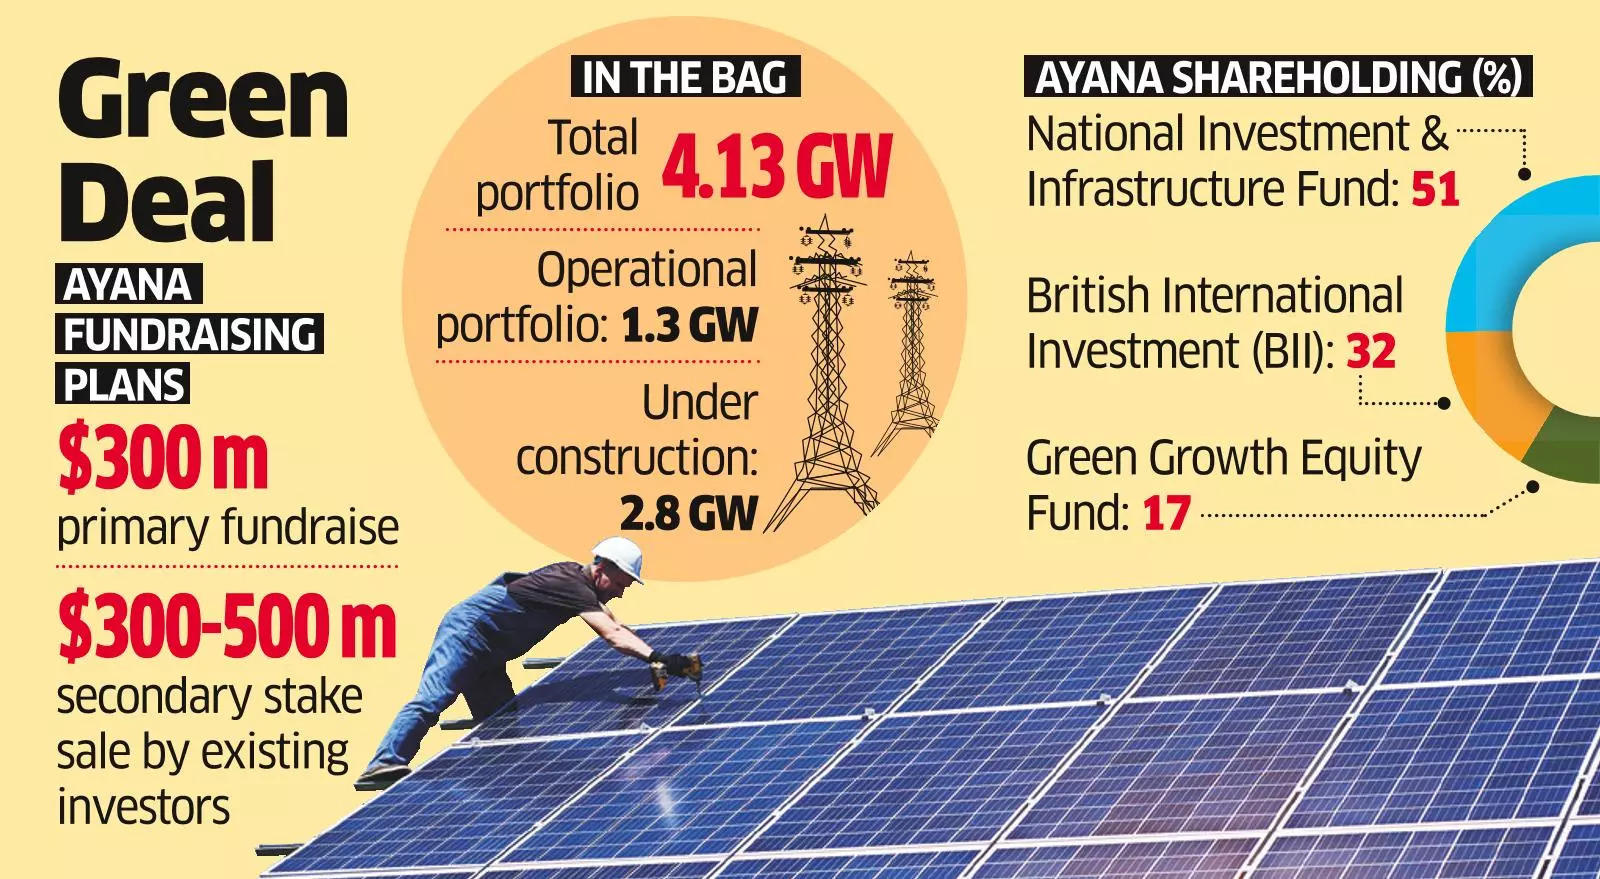 Ayana Renewable Investors Plan Stake Sale to Raise up to $800m